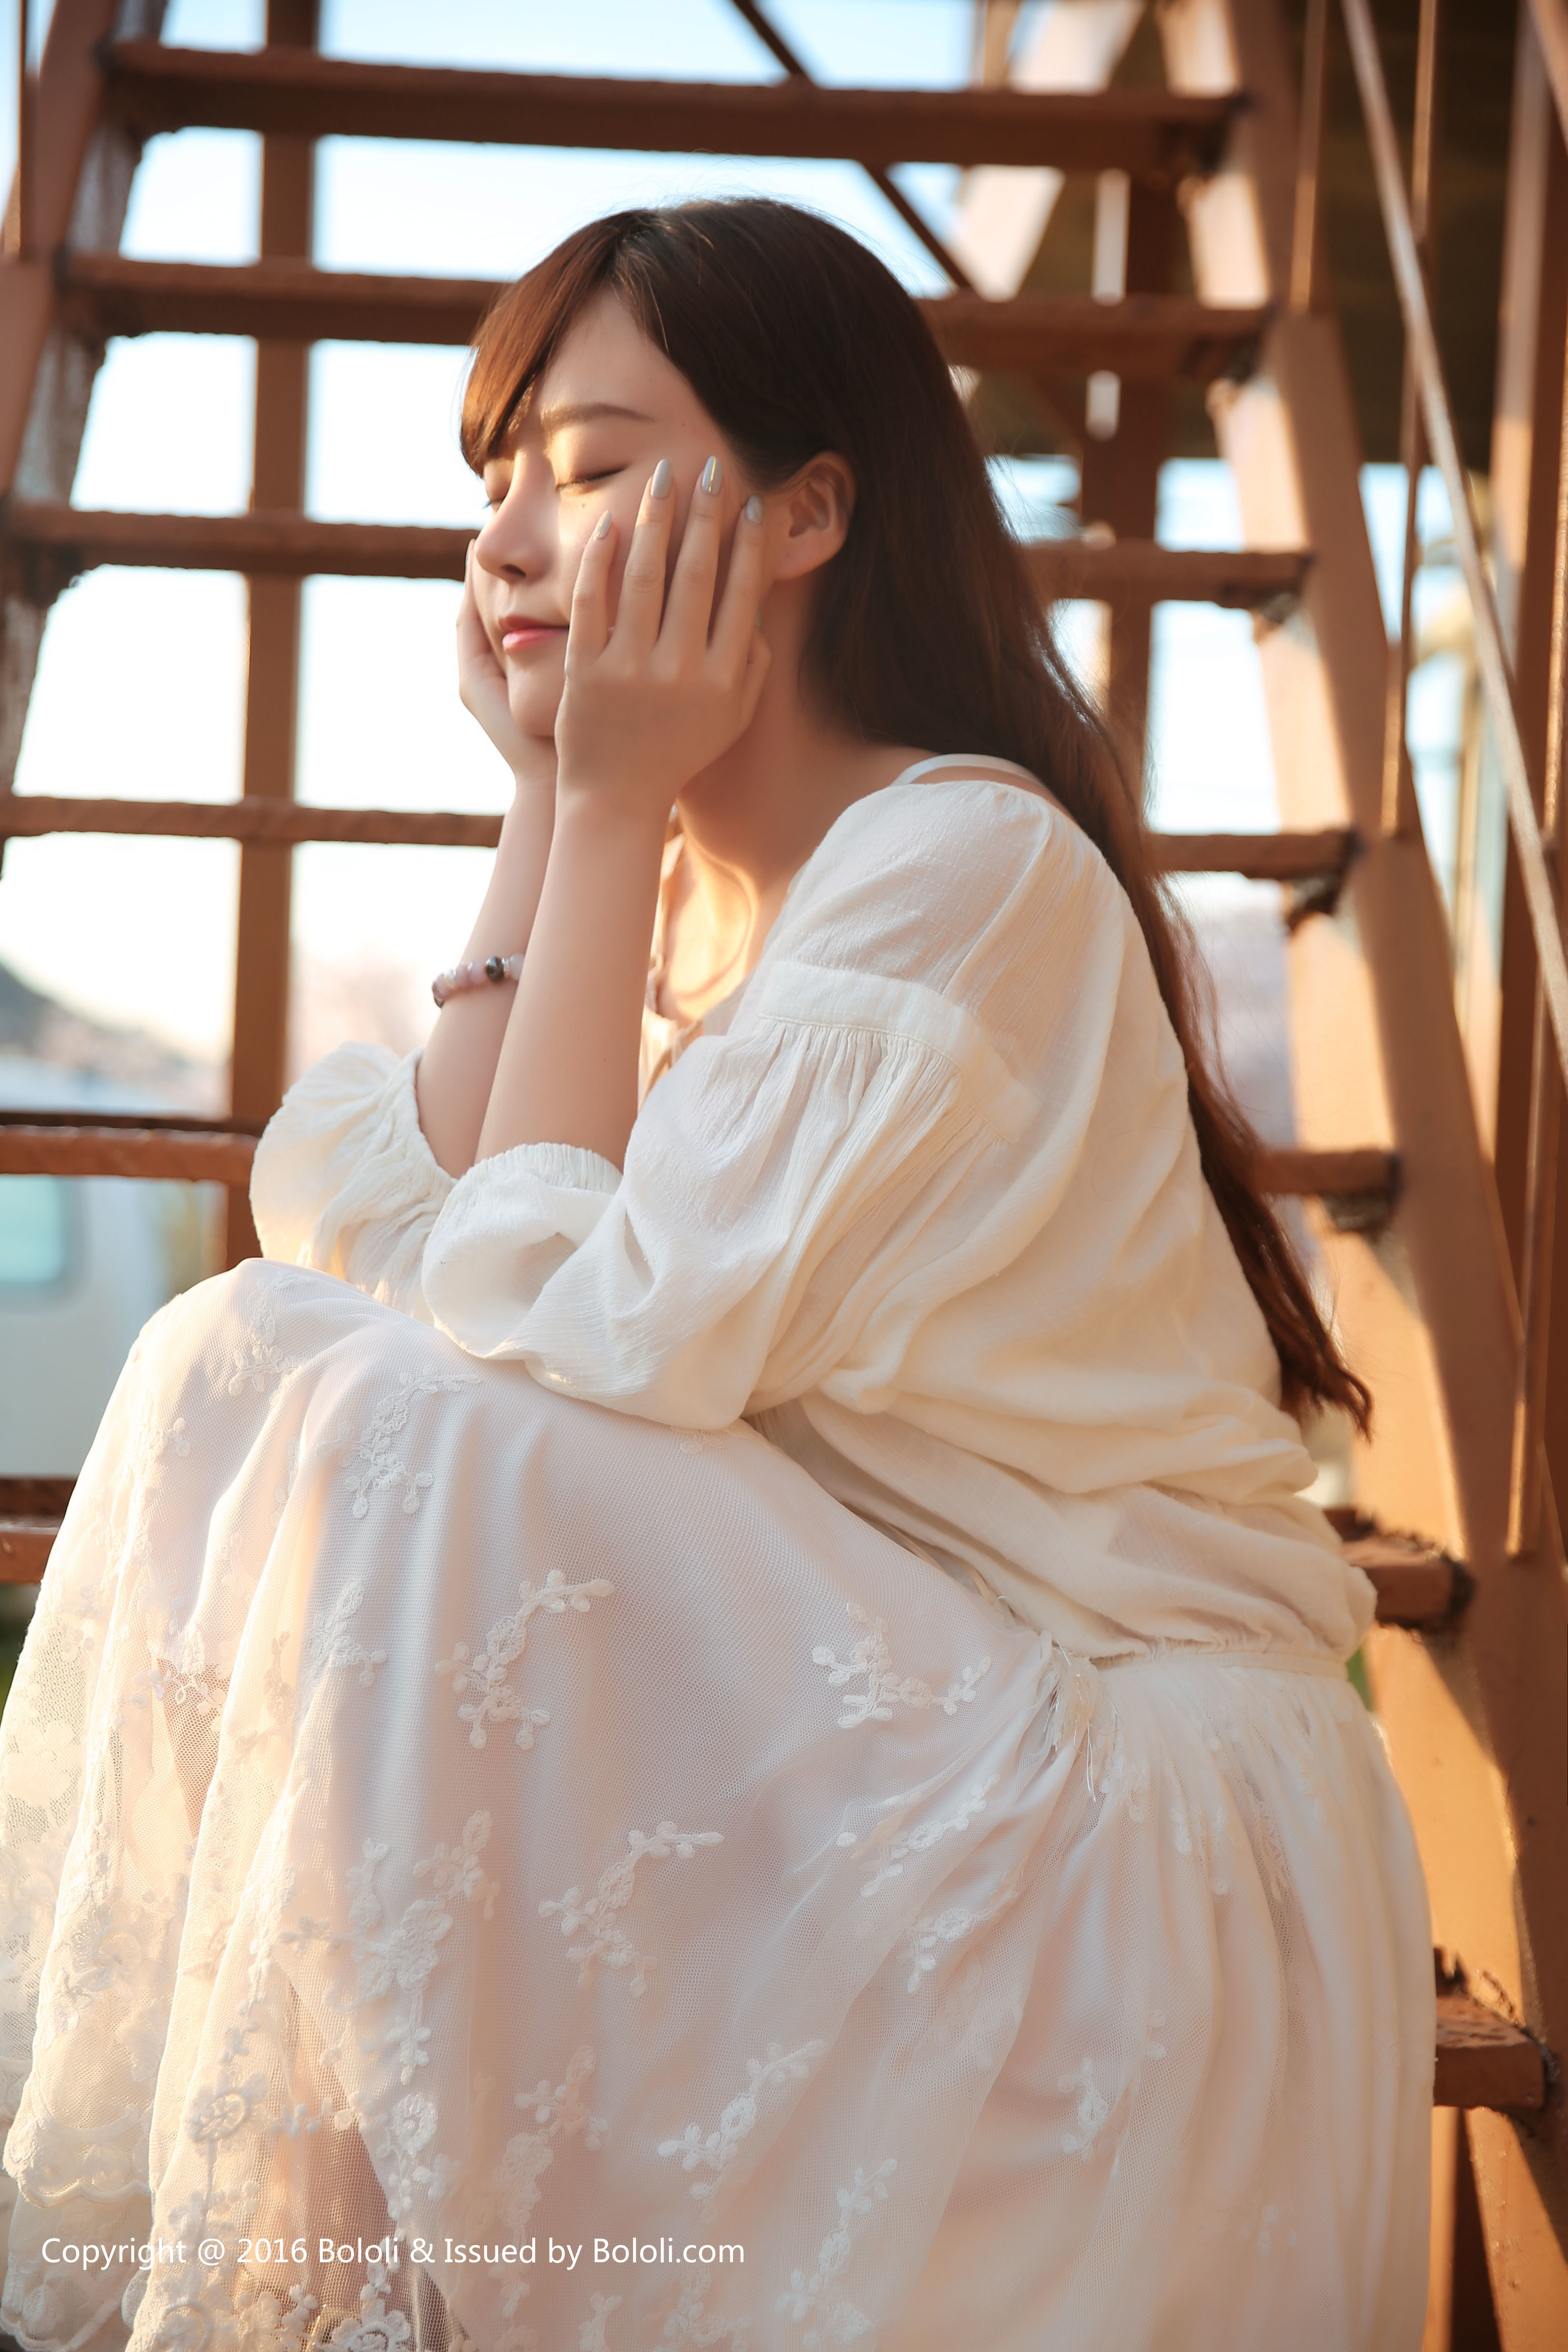 People 3840x5760 women Asian Bololi Liu You Qi white dress closed eyes hand on face painted nails sunset long hair women outdoors looking away Chinese Chinese model